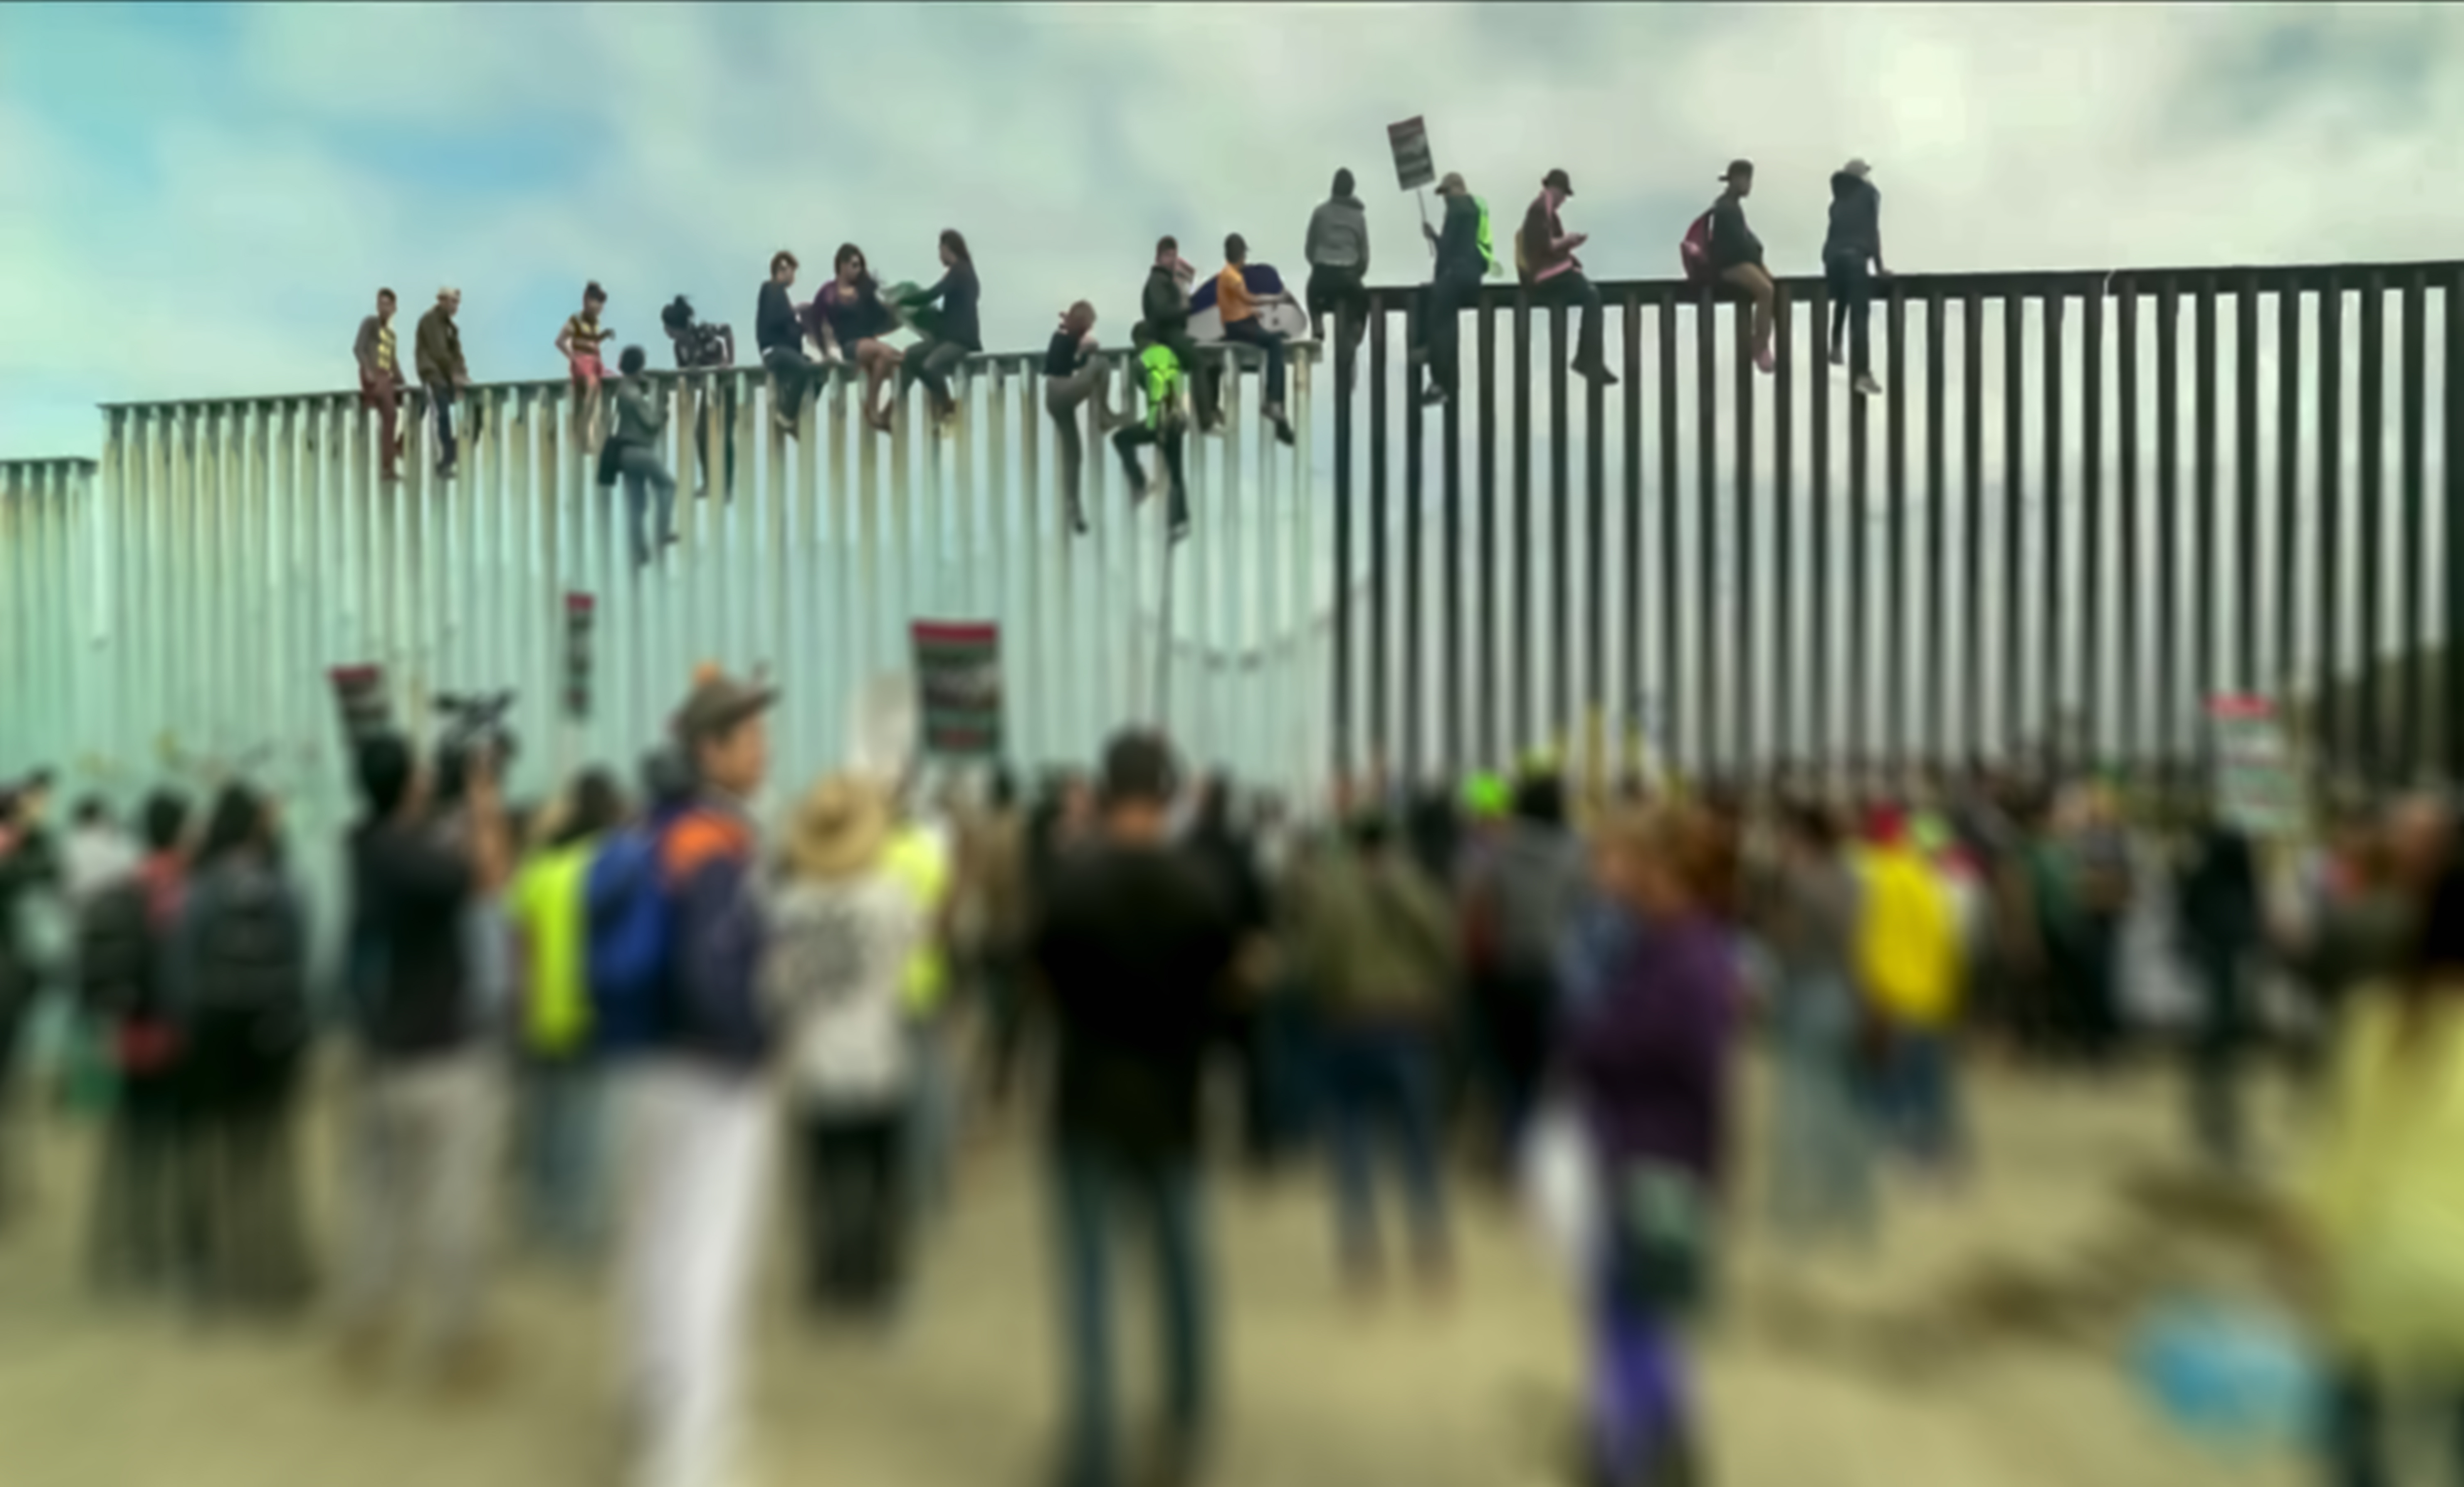 The Border Within: The Economics of Immigration in an Age of Fear